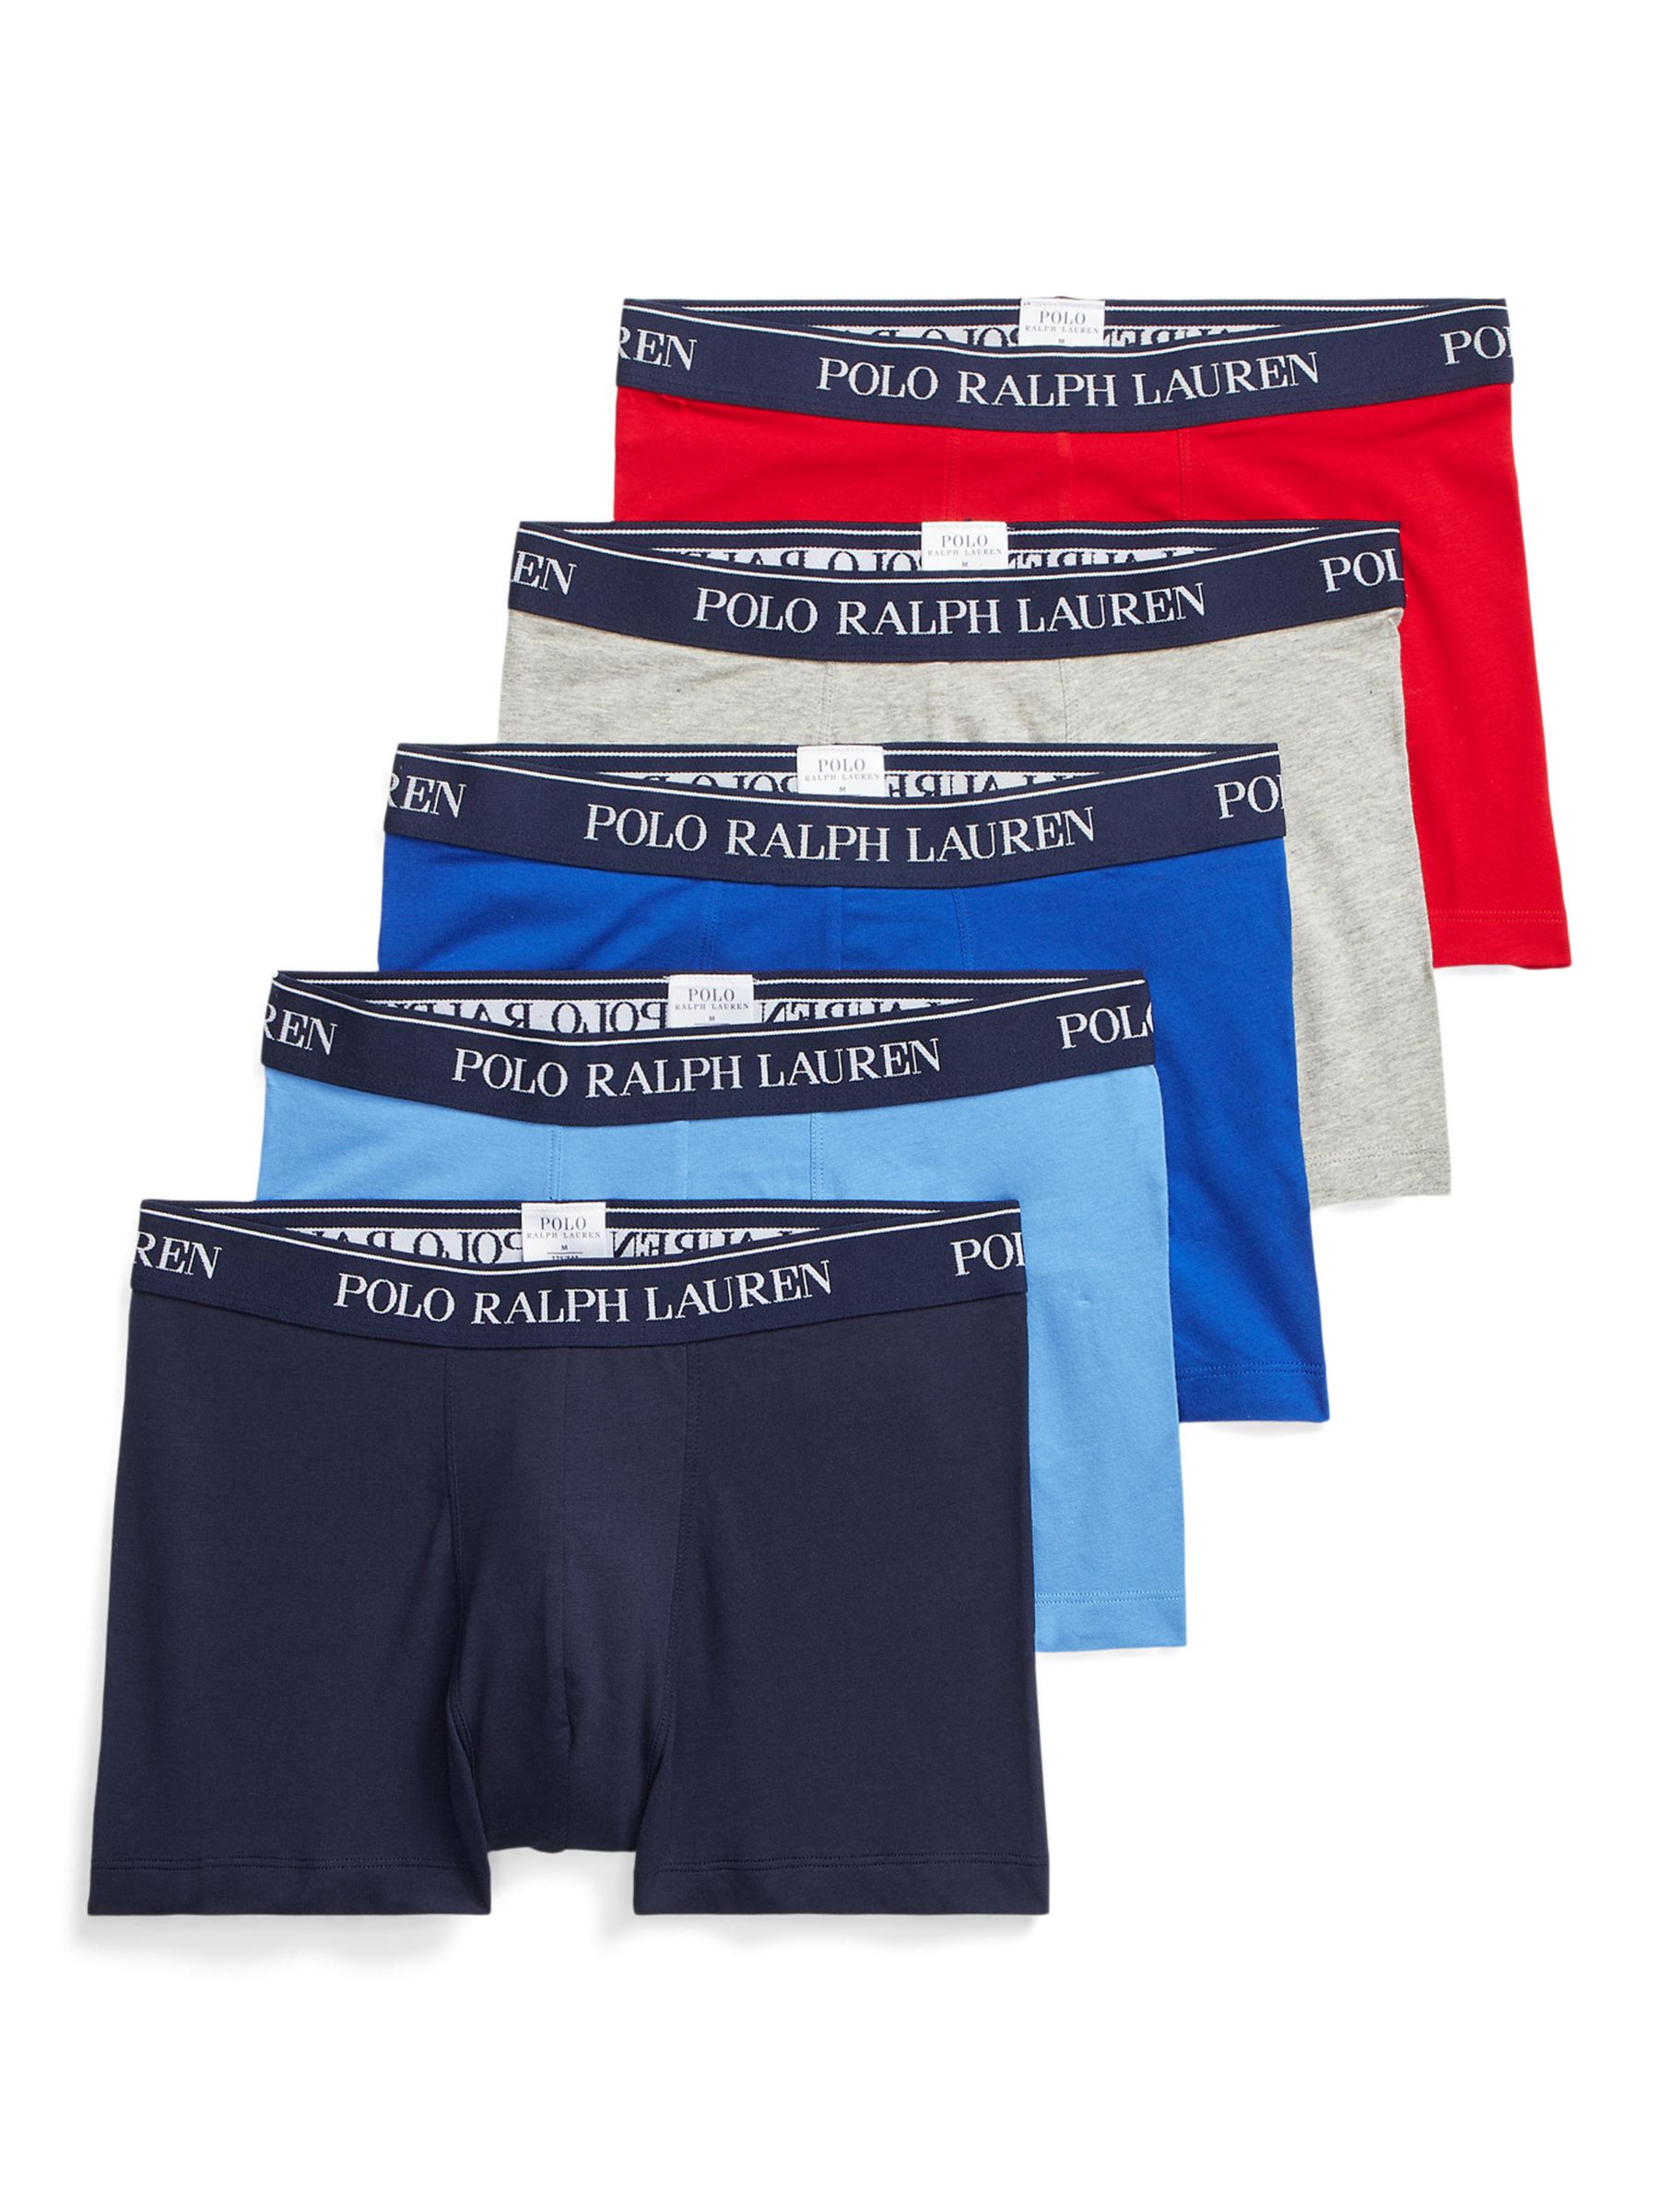 Polo Ralph Lauren Cotton Stretch Trunks, Pack of 5, Blue/Grey/Red Multi ...